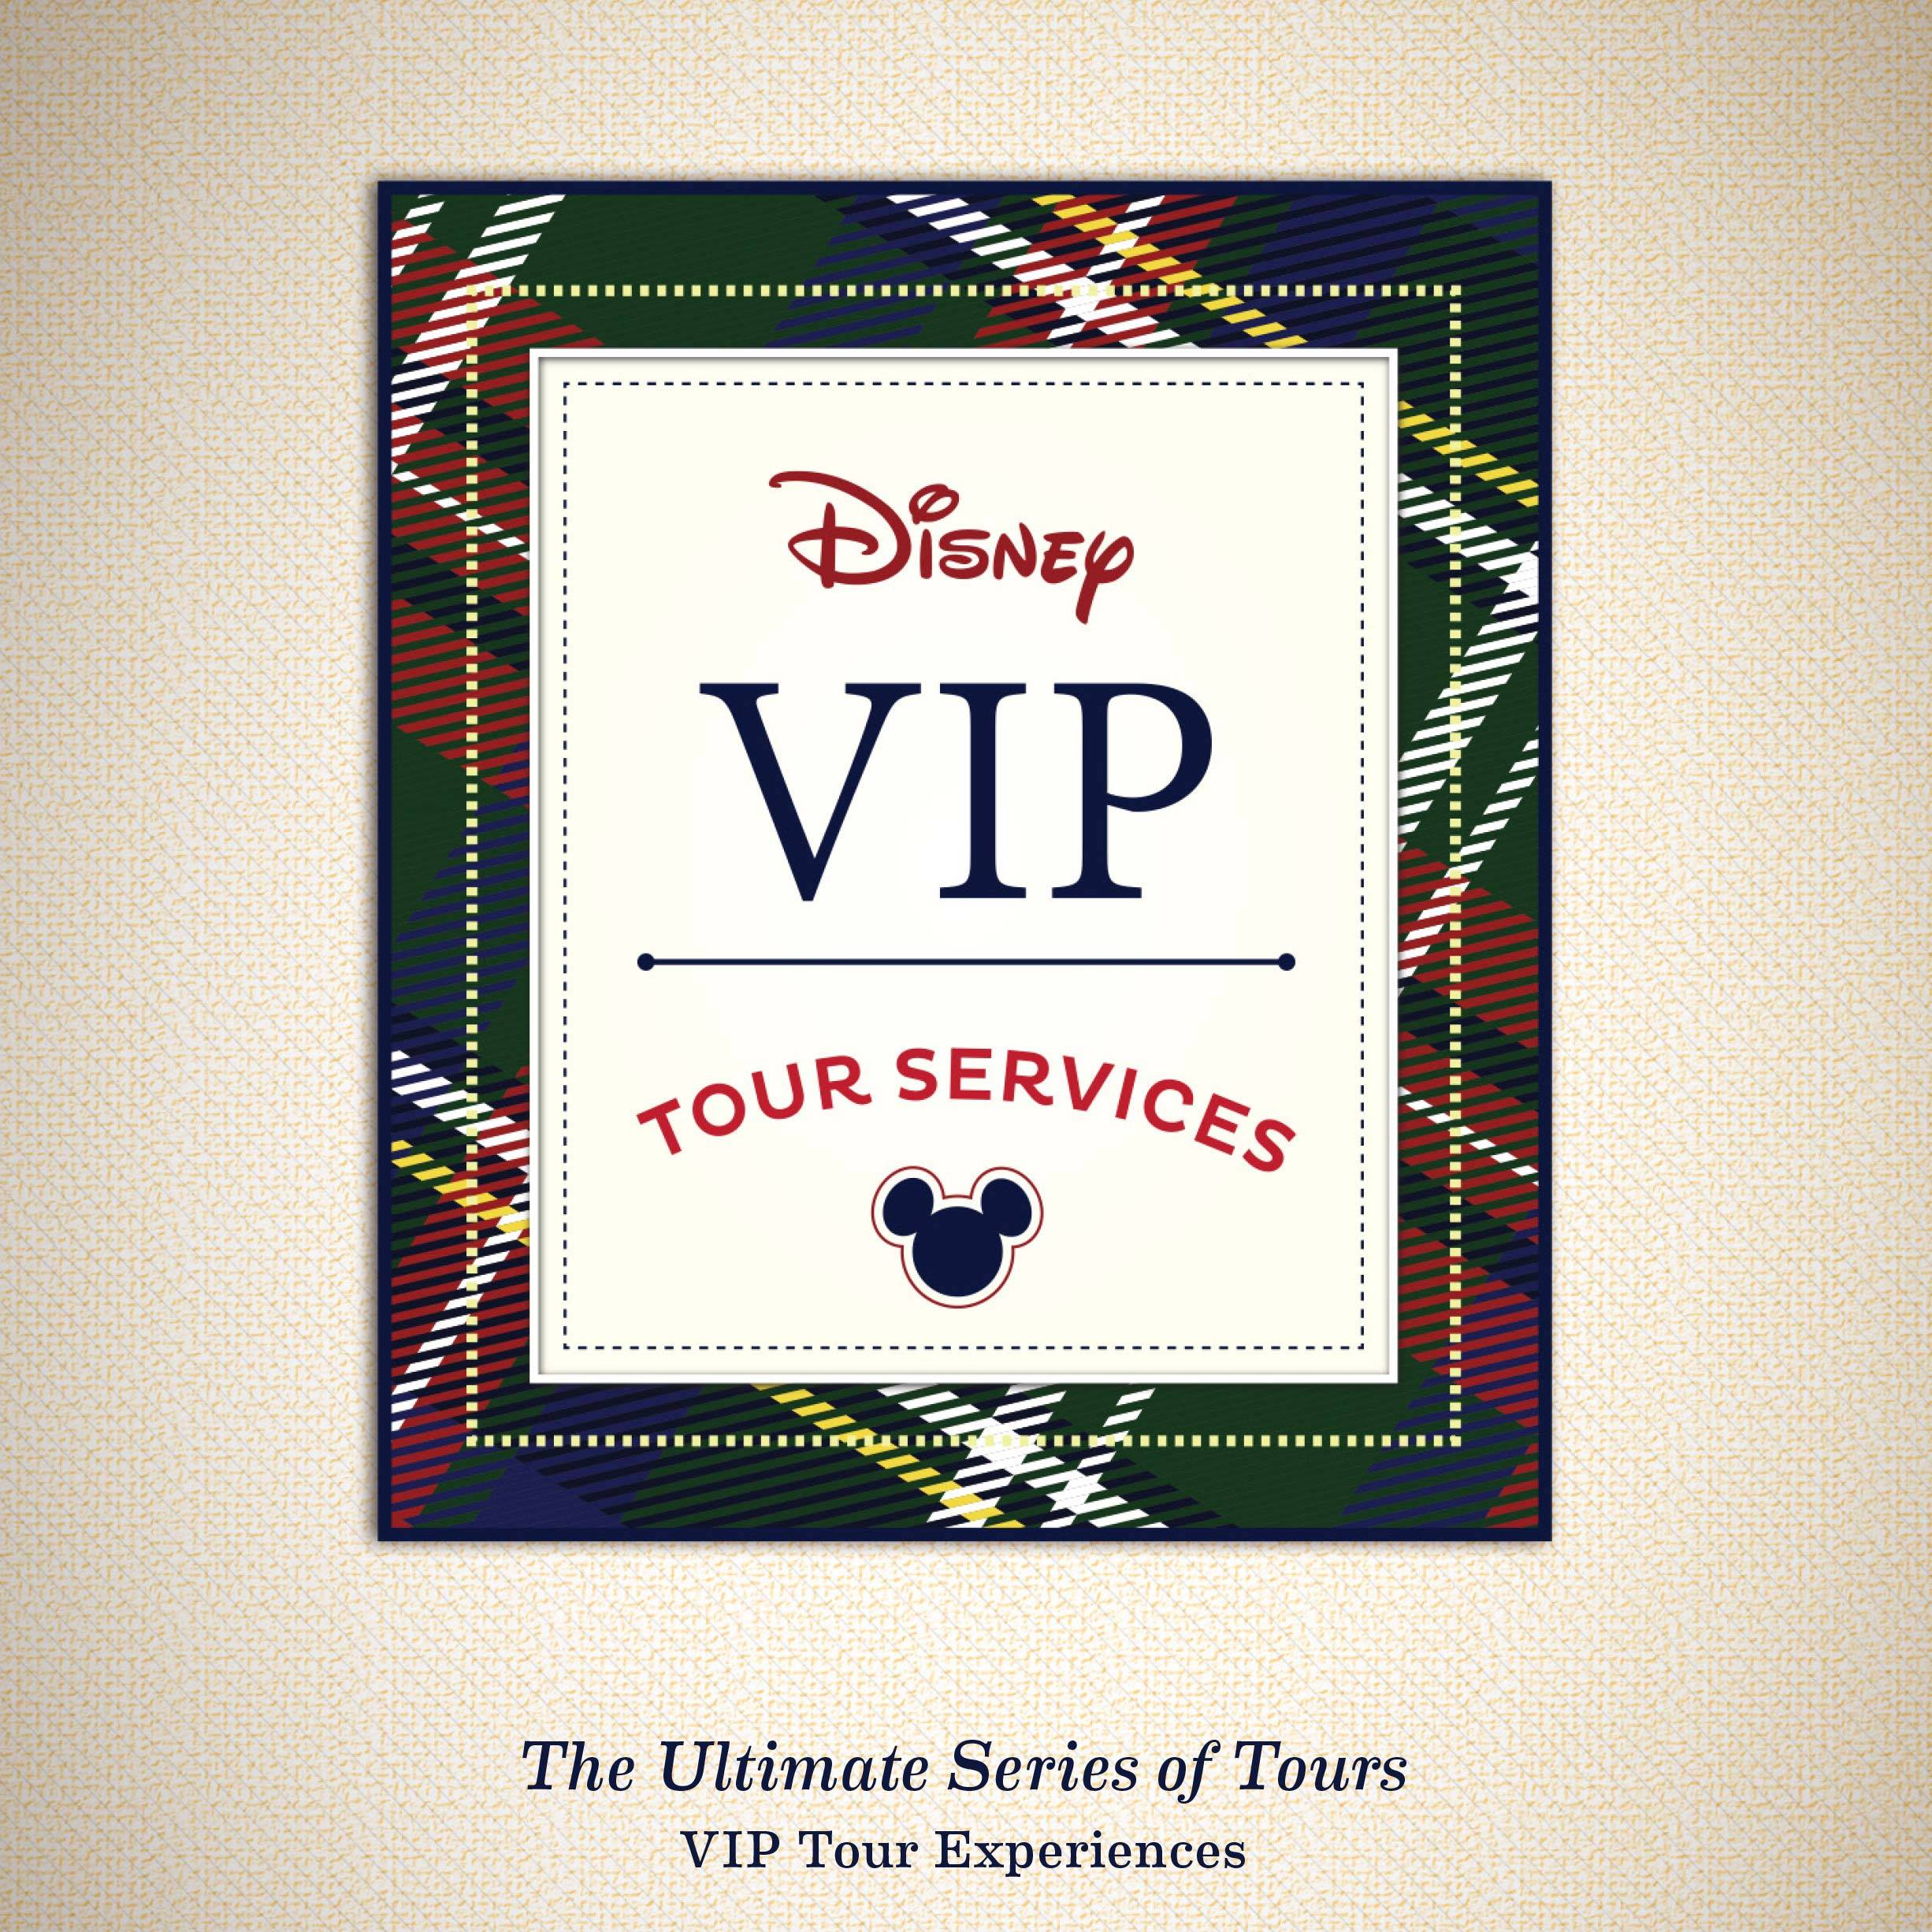 Disney offers two new VIP Tour Experiences - one geared towards thrill seekers and one for families